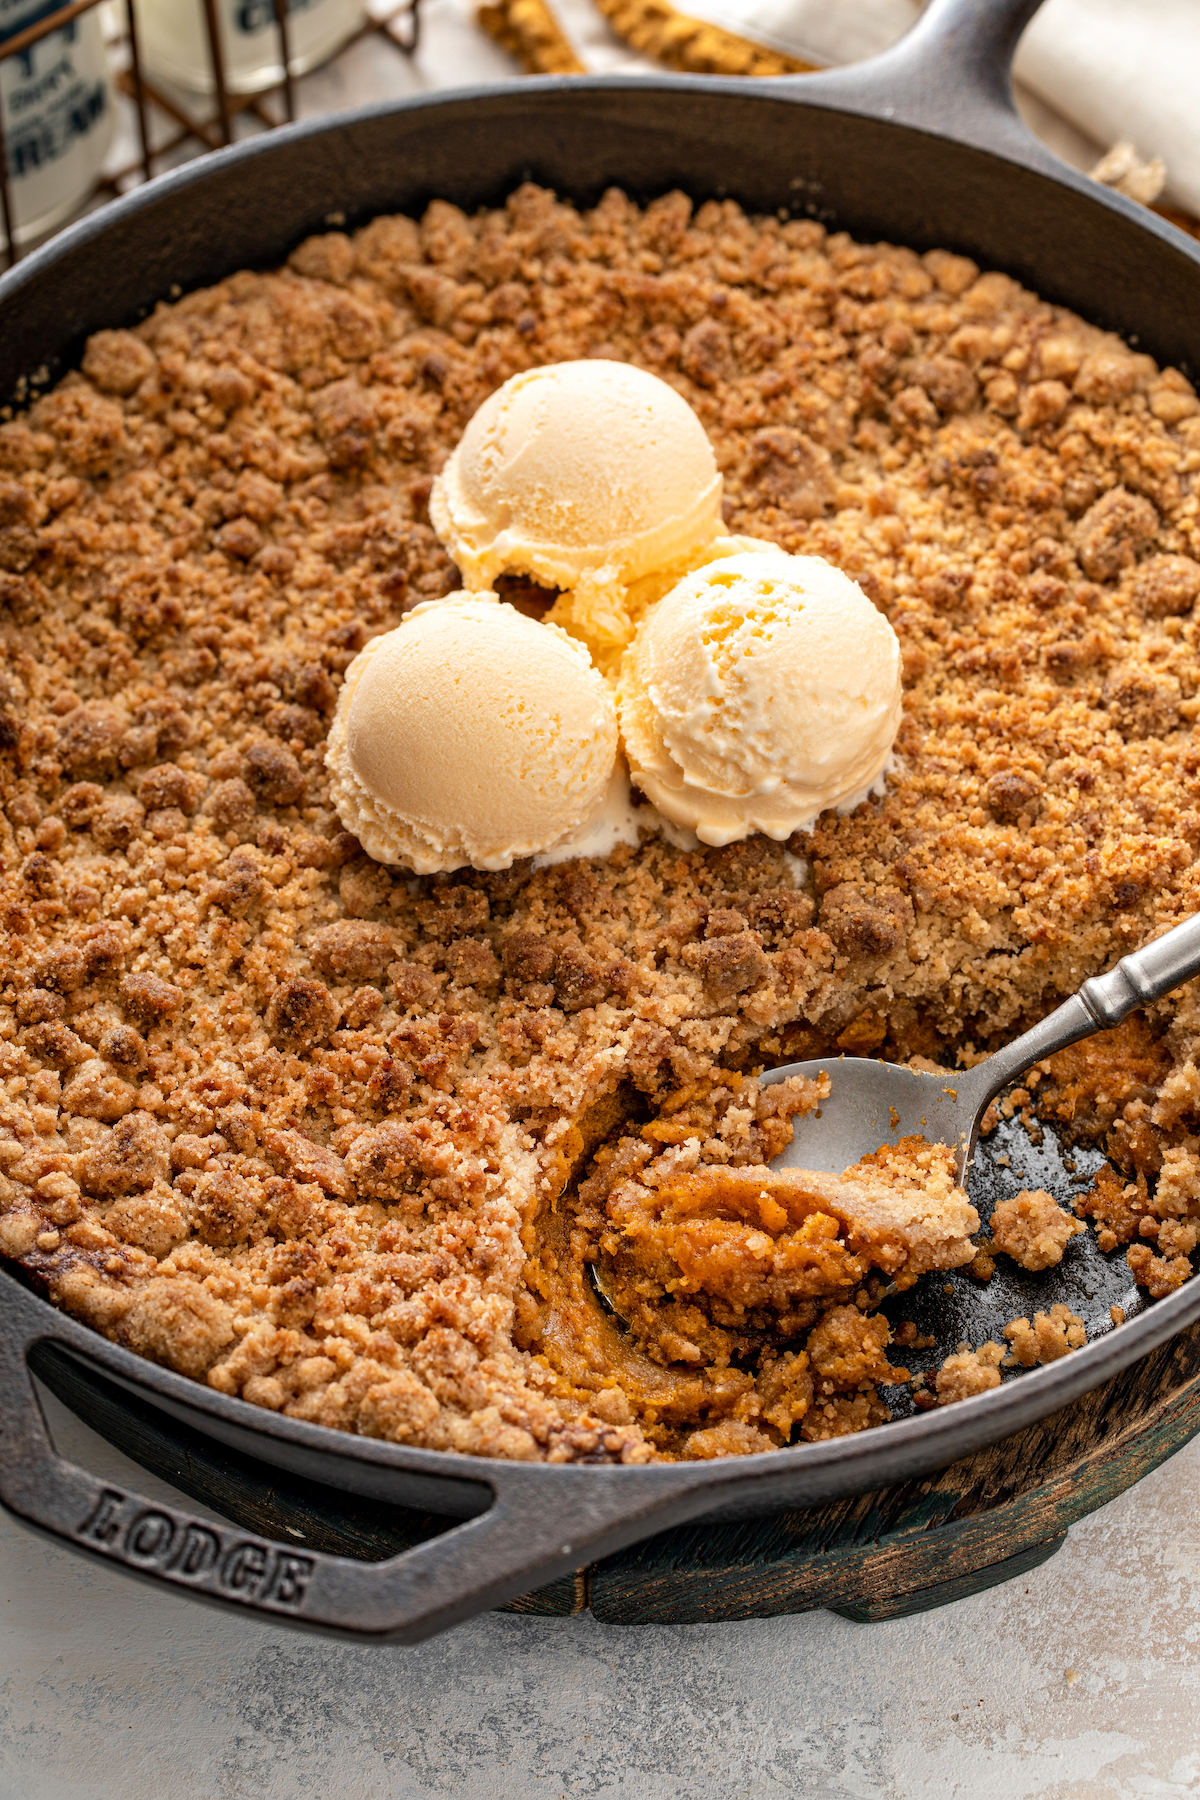 A spoon scooping a serving of sweet potato pie crumble.